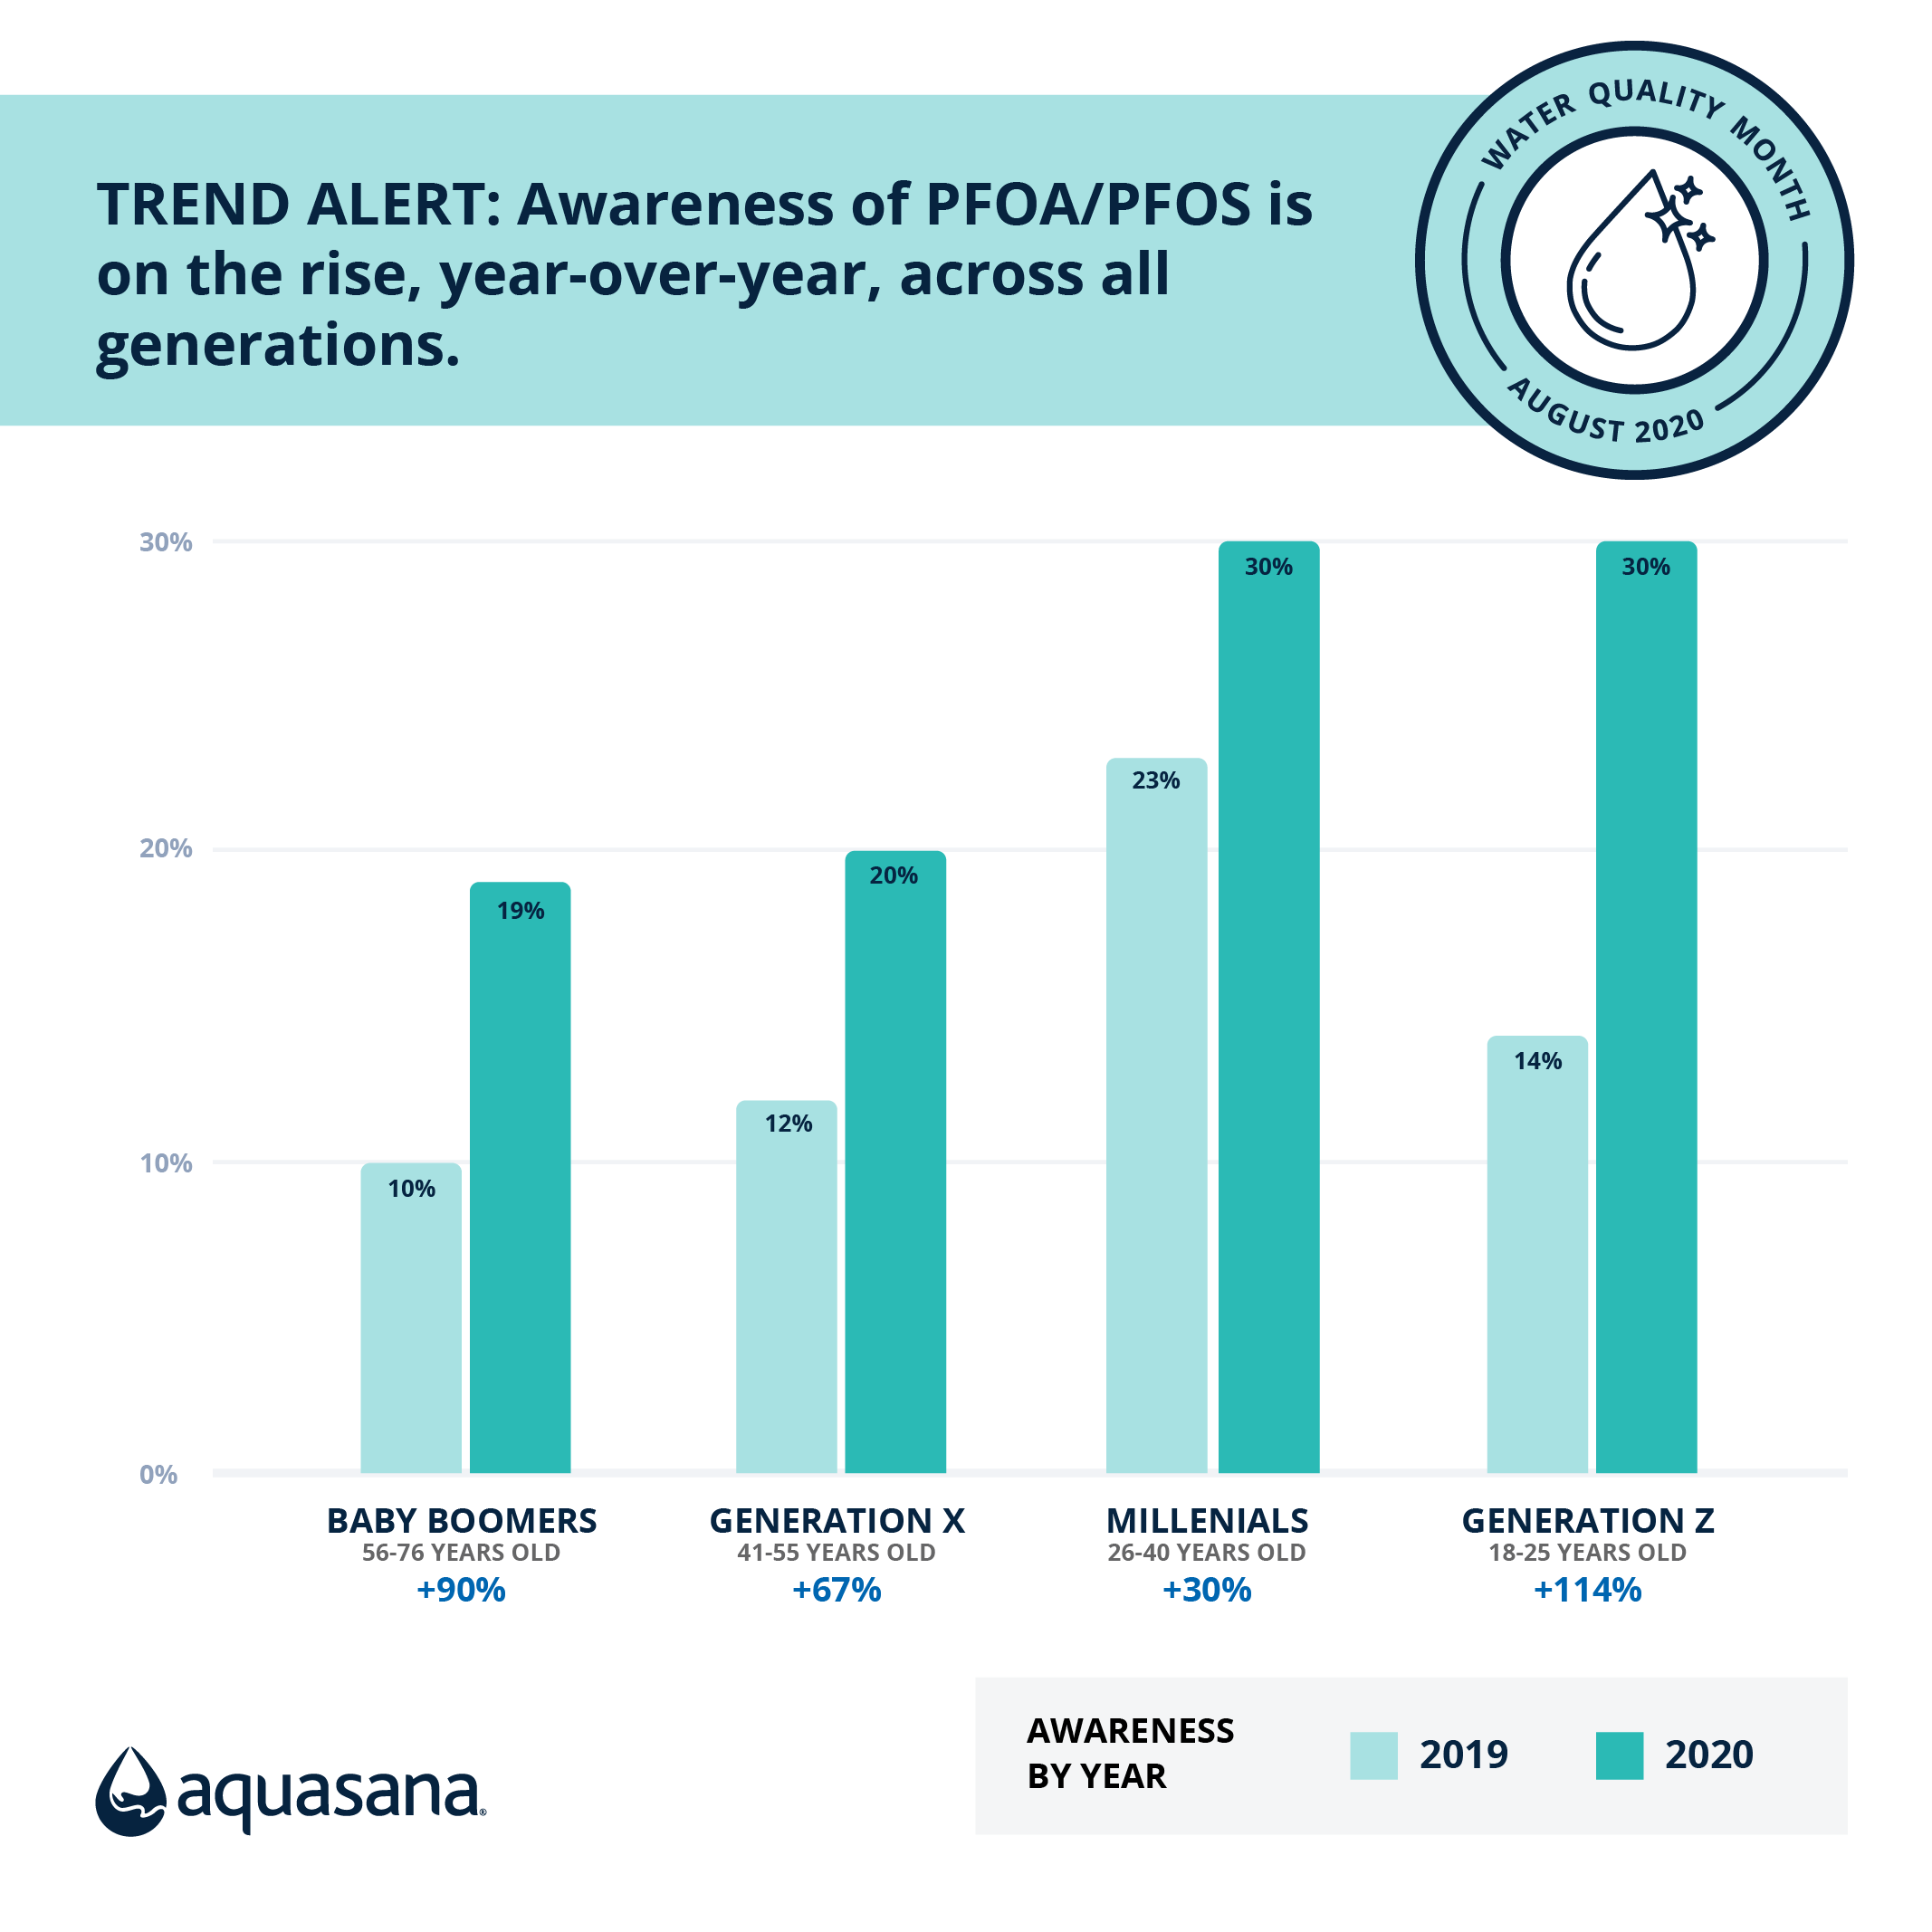 Overall awareness of the "forever chemicals" PFOA/PFOS is up by 44% in 2020.